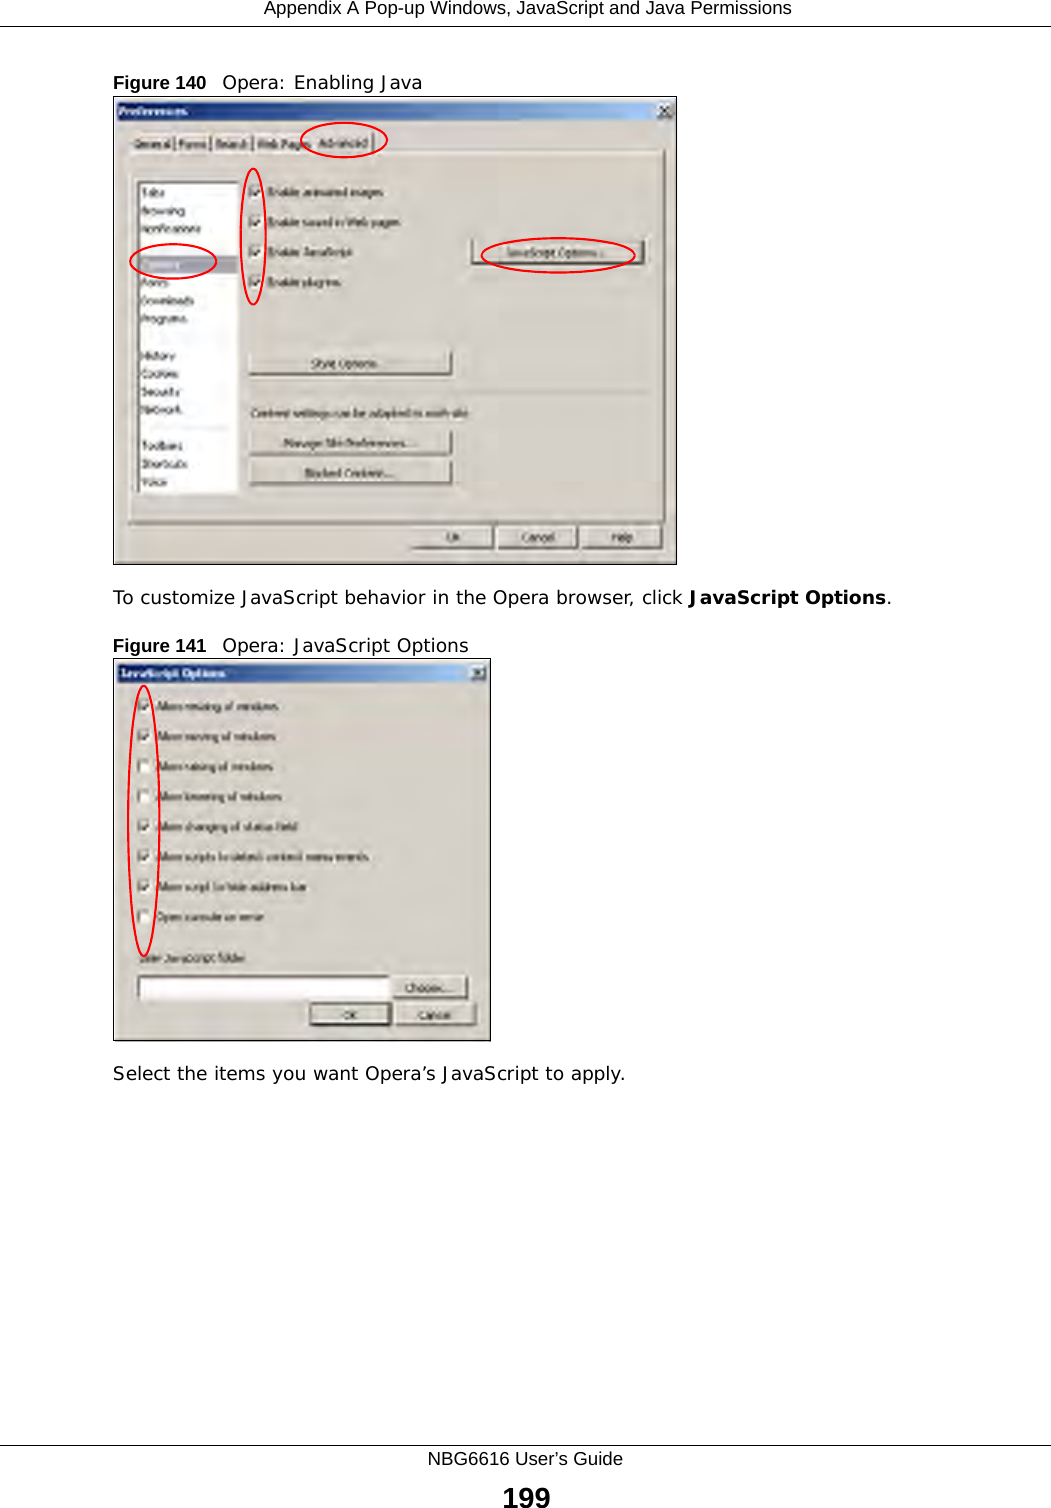  Appendix A Pop-up Windows, JavaScript and Java PermissionsNBG6616 User’s Guide199Figure 140   Opera: Enabling JavaTo customize JavaScript behavior in the Opera browser, click JavaScript Options. Figure 141   Opera: JavaScript OptionsSelect the items you want Opera’s JavaScript to apply.